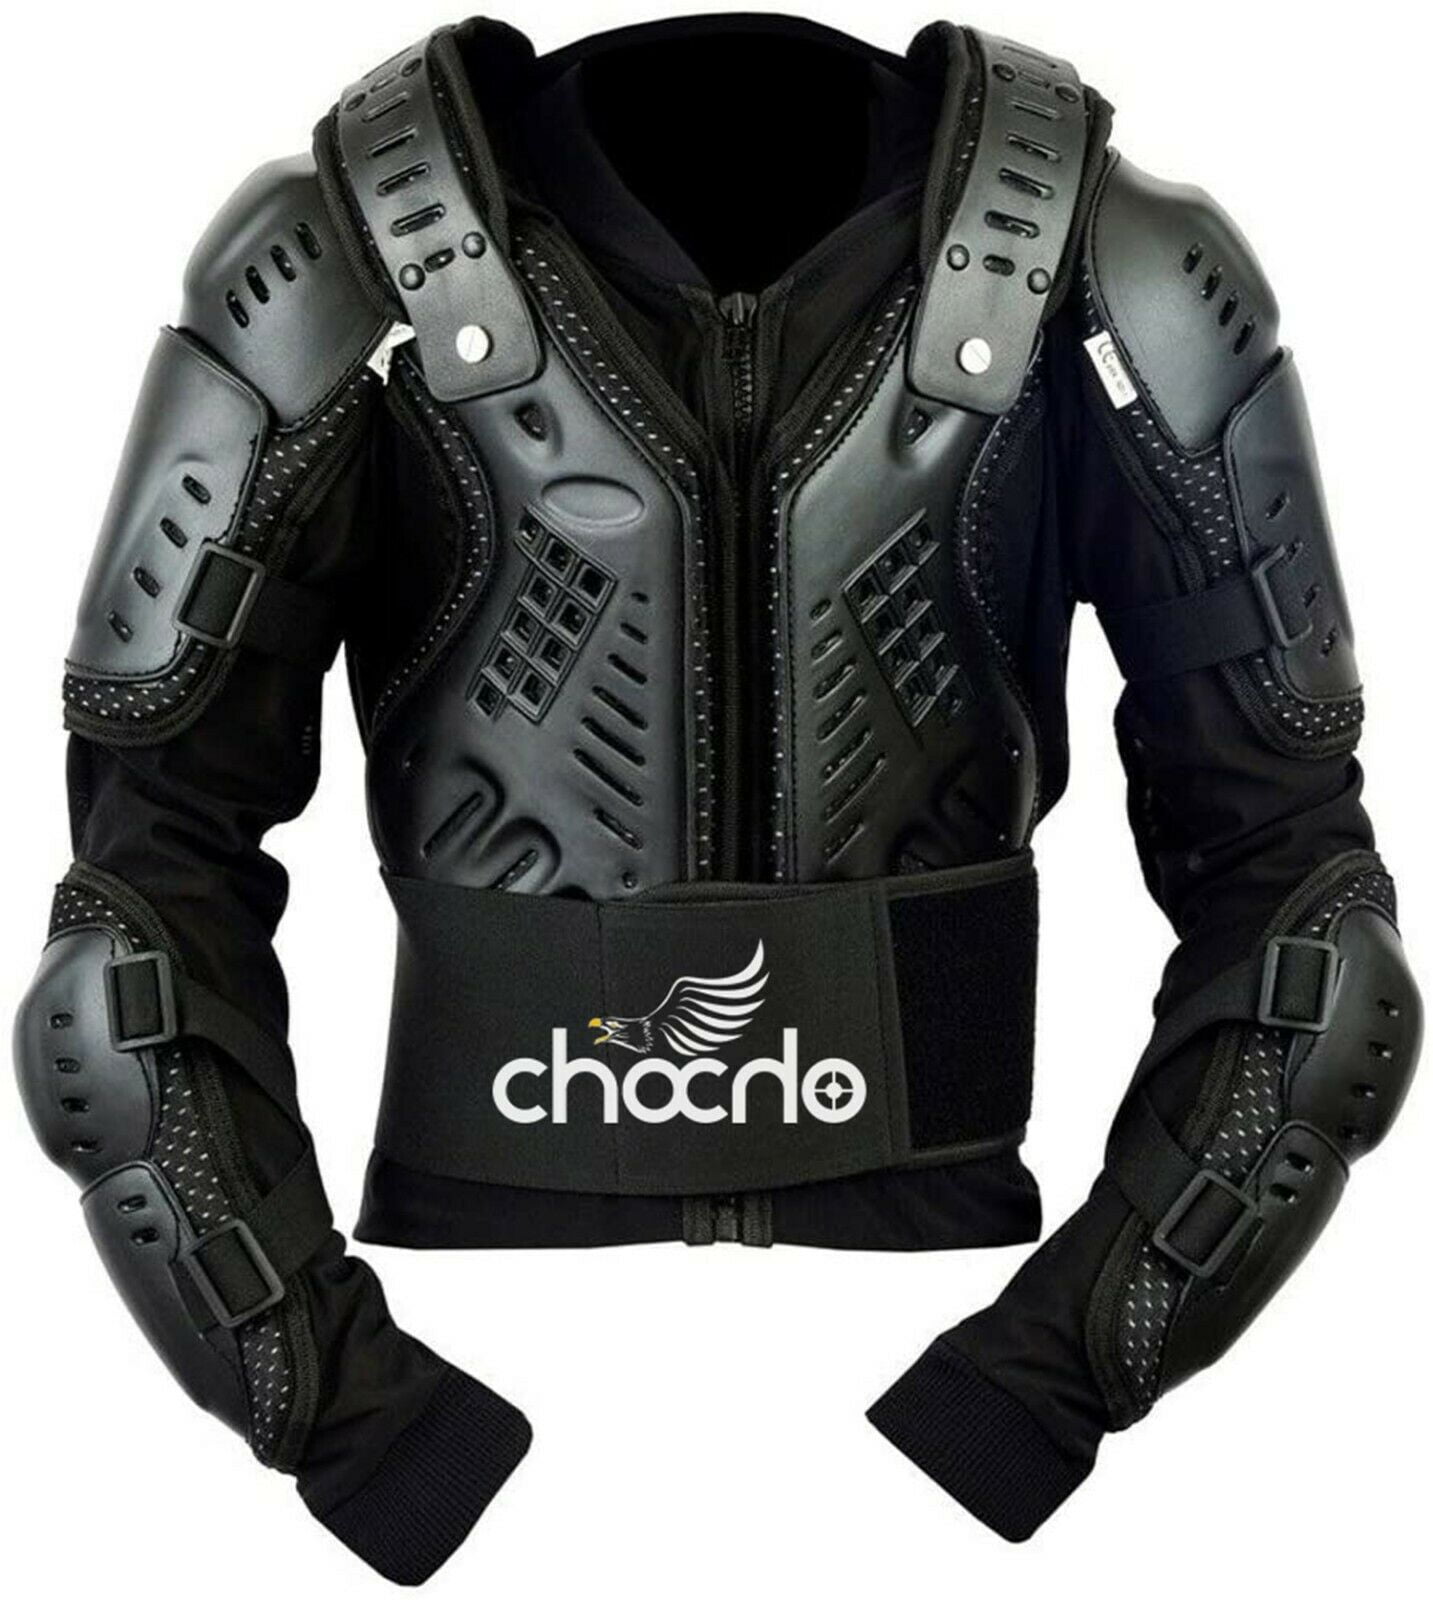 Black Motocross Motorbike Body Armour Motorcycle Protection Jacket Armoured Mountain Cycling Riding Skating Snowboarding Track Crash Guard CE Approved 